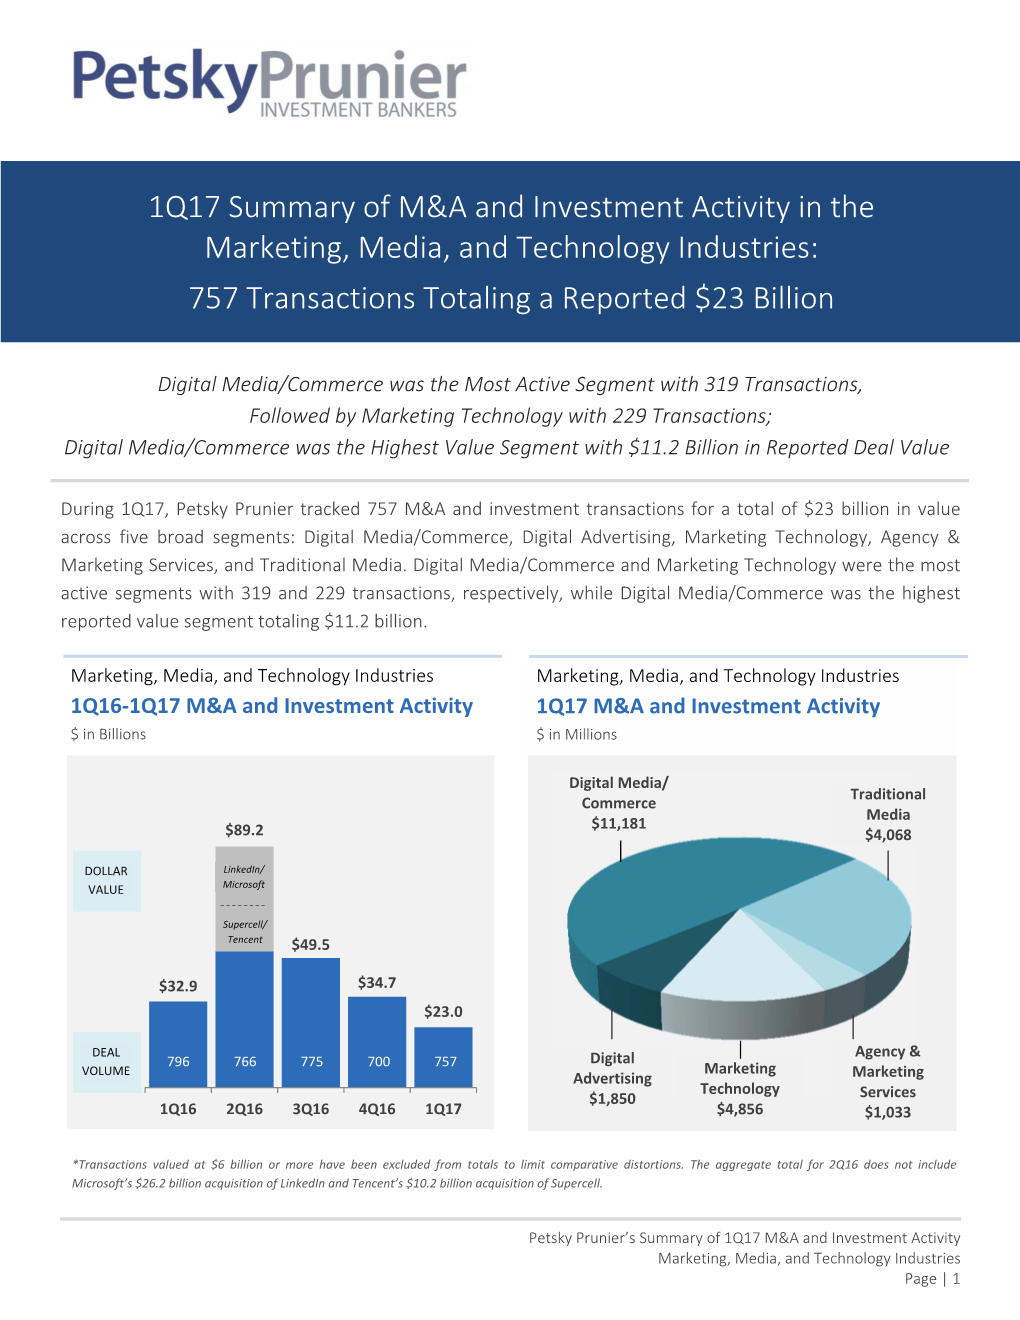 1Q17 Summary of M&A and Investment Activity